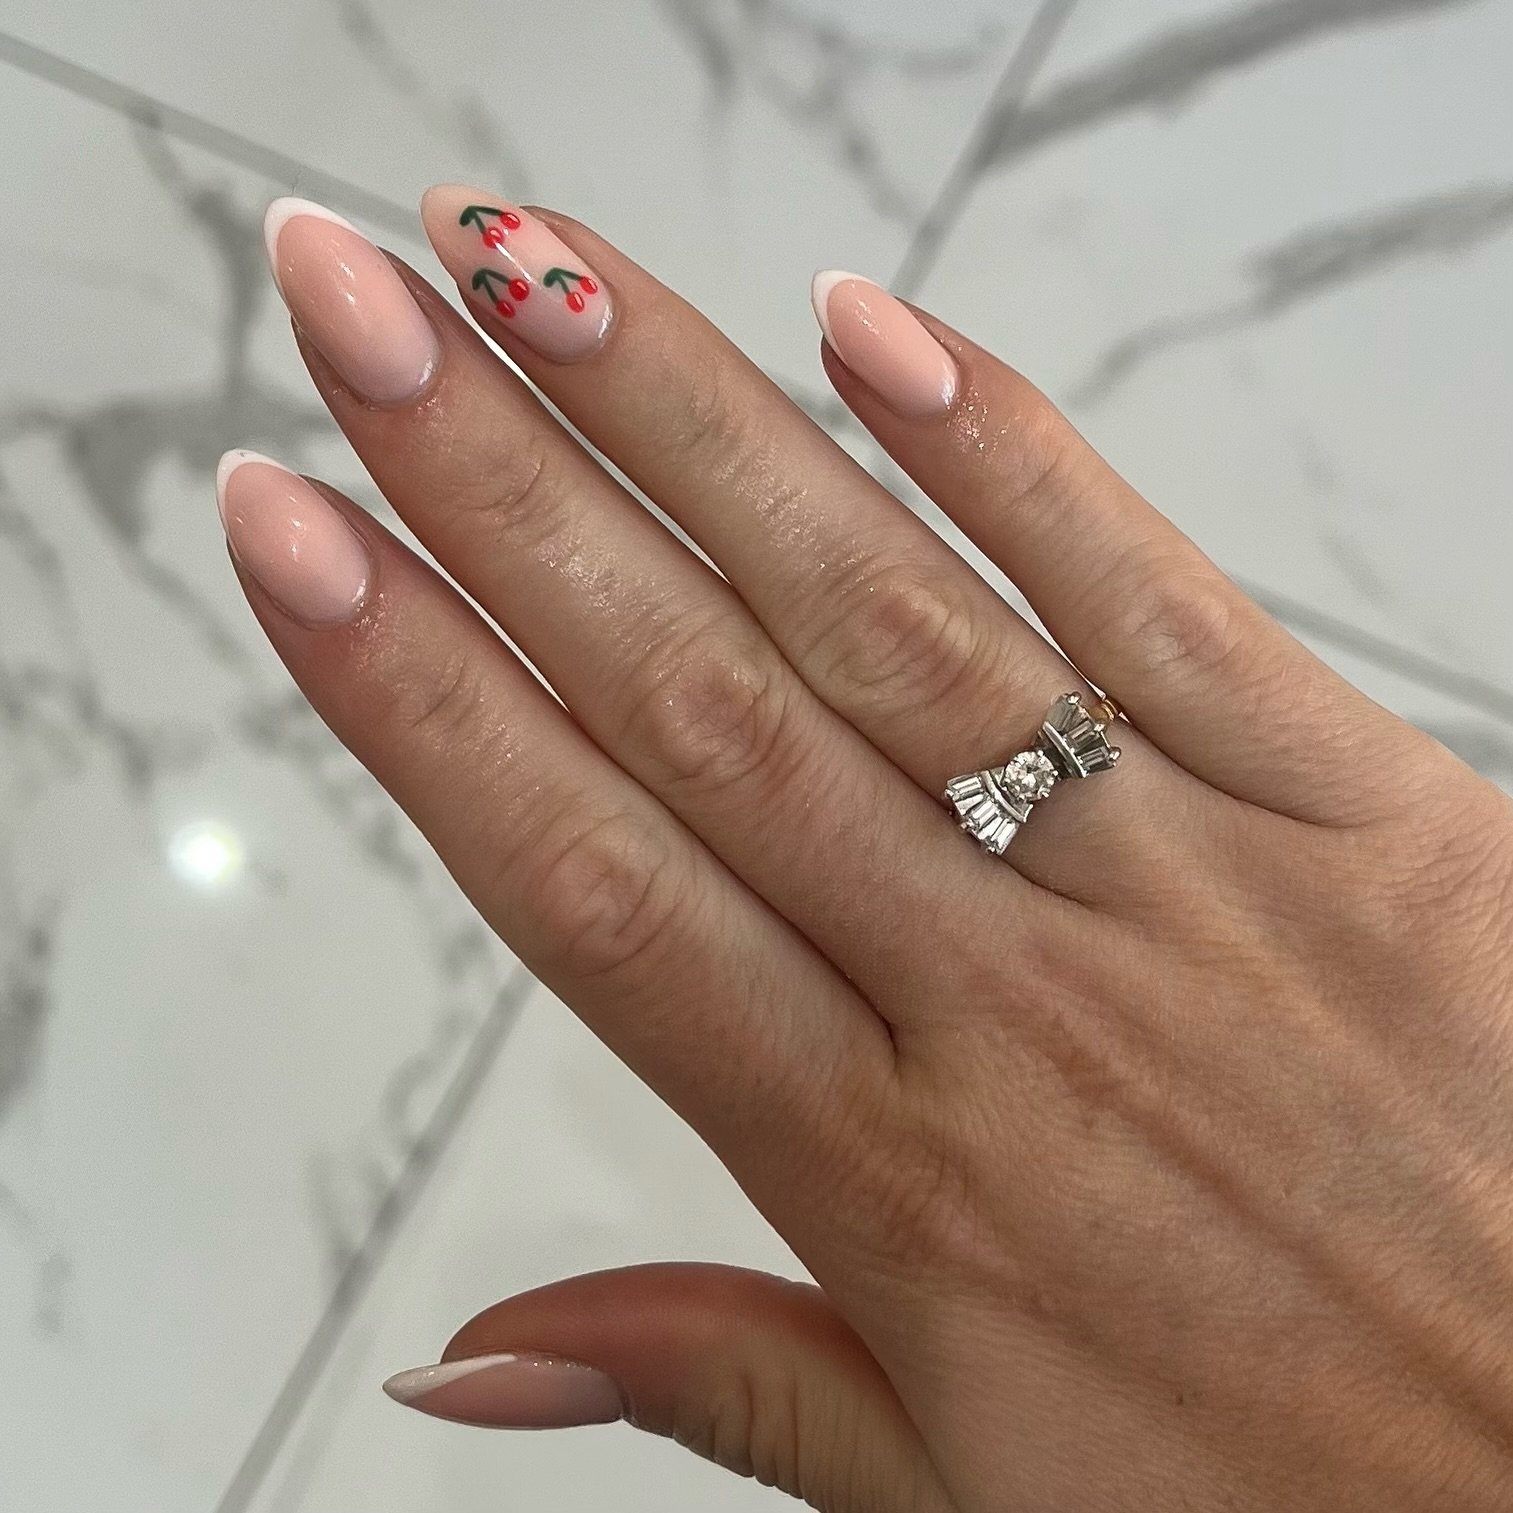 Cute C H E R R Y inspired baby French nails for a fresh look! Keep your Dolly BIAB nails on point with maintenance every 3-4 weeks. 💅🍒 #NailArt #BIAB

Prep @officialnavyprofessional 
All @the_gelbottle_inc products
Nails by @emmamarucci86